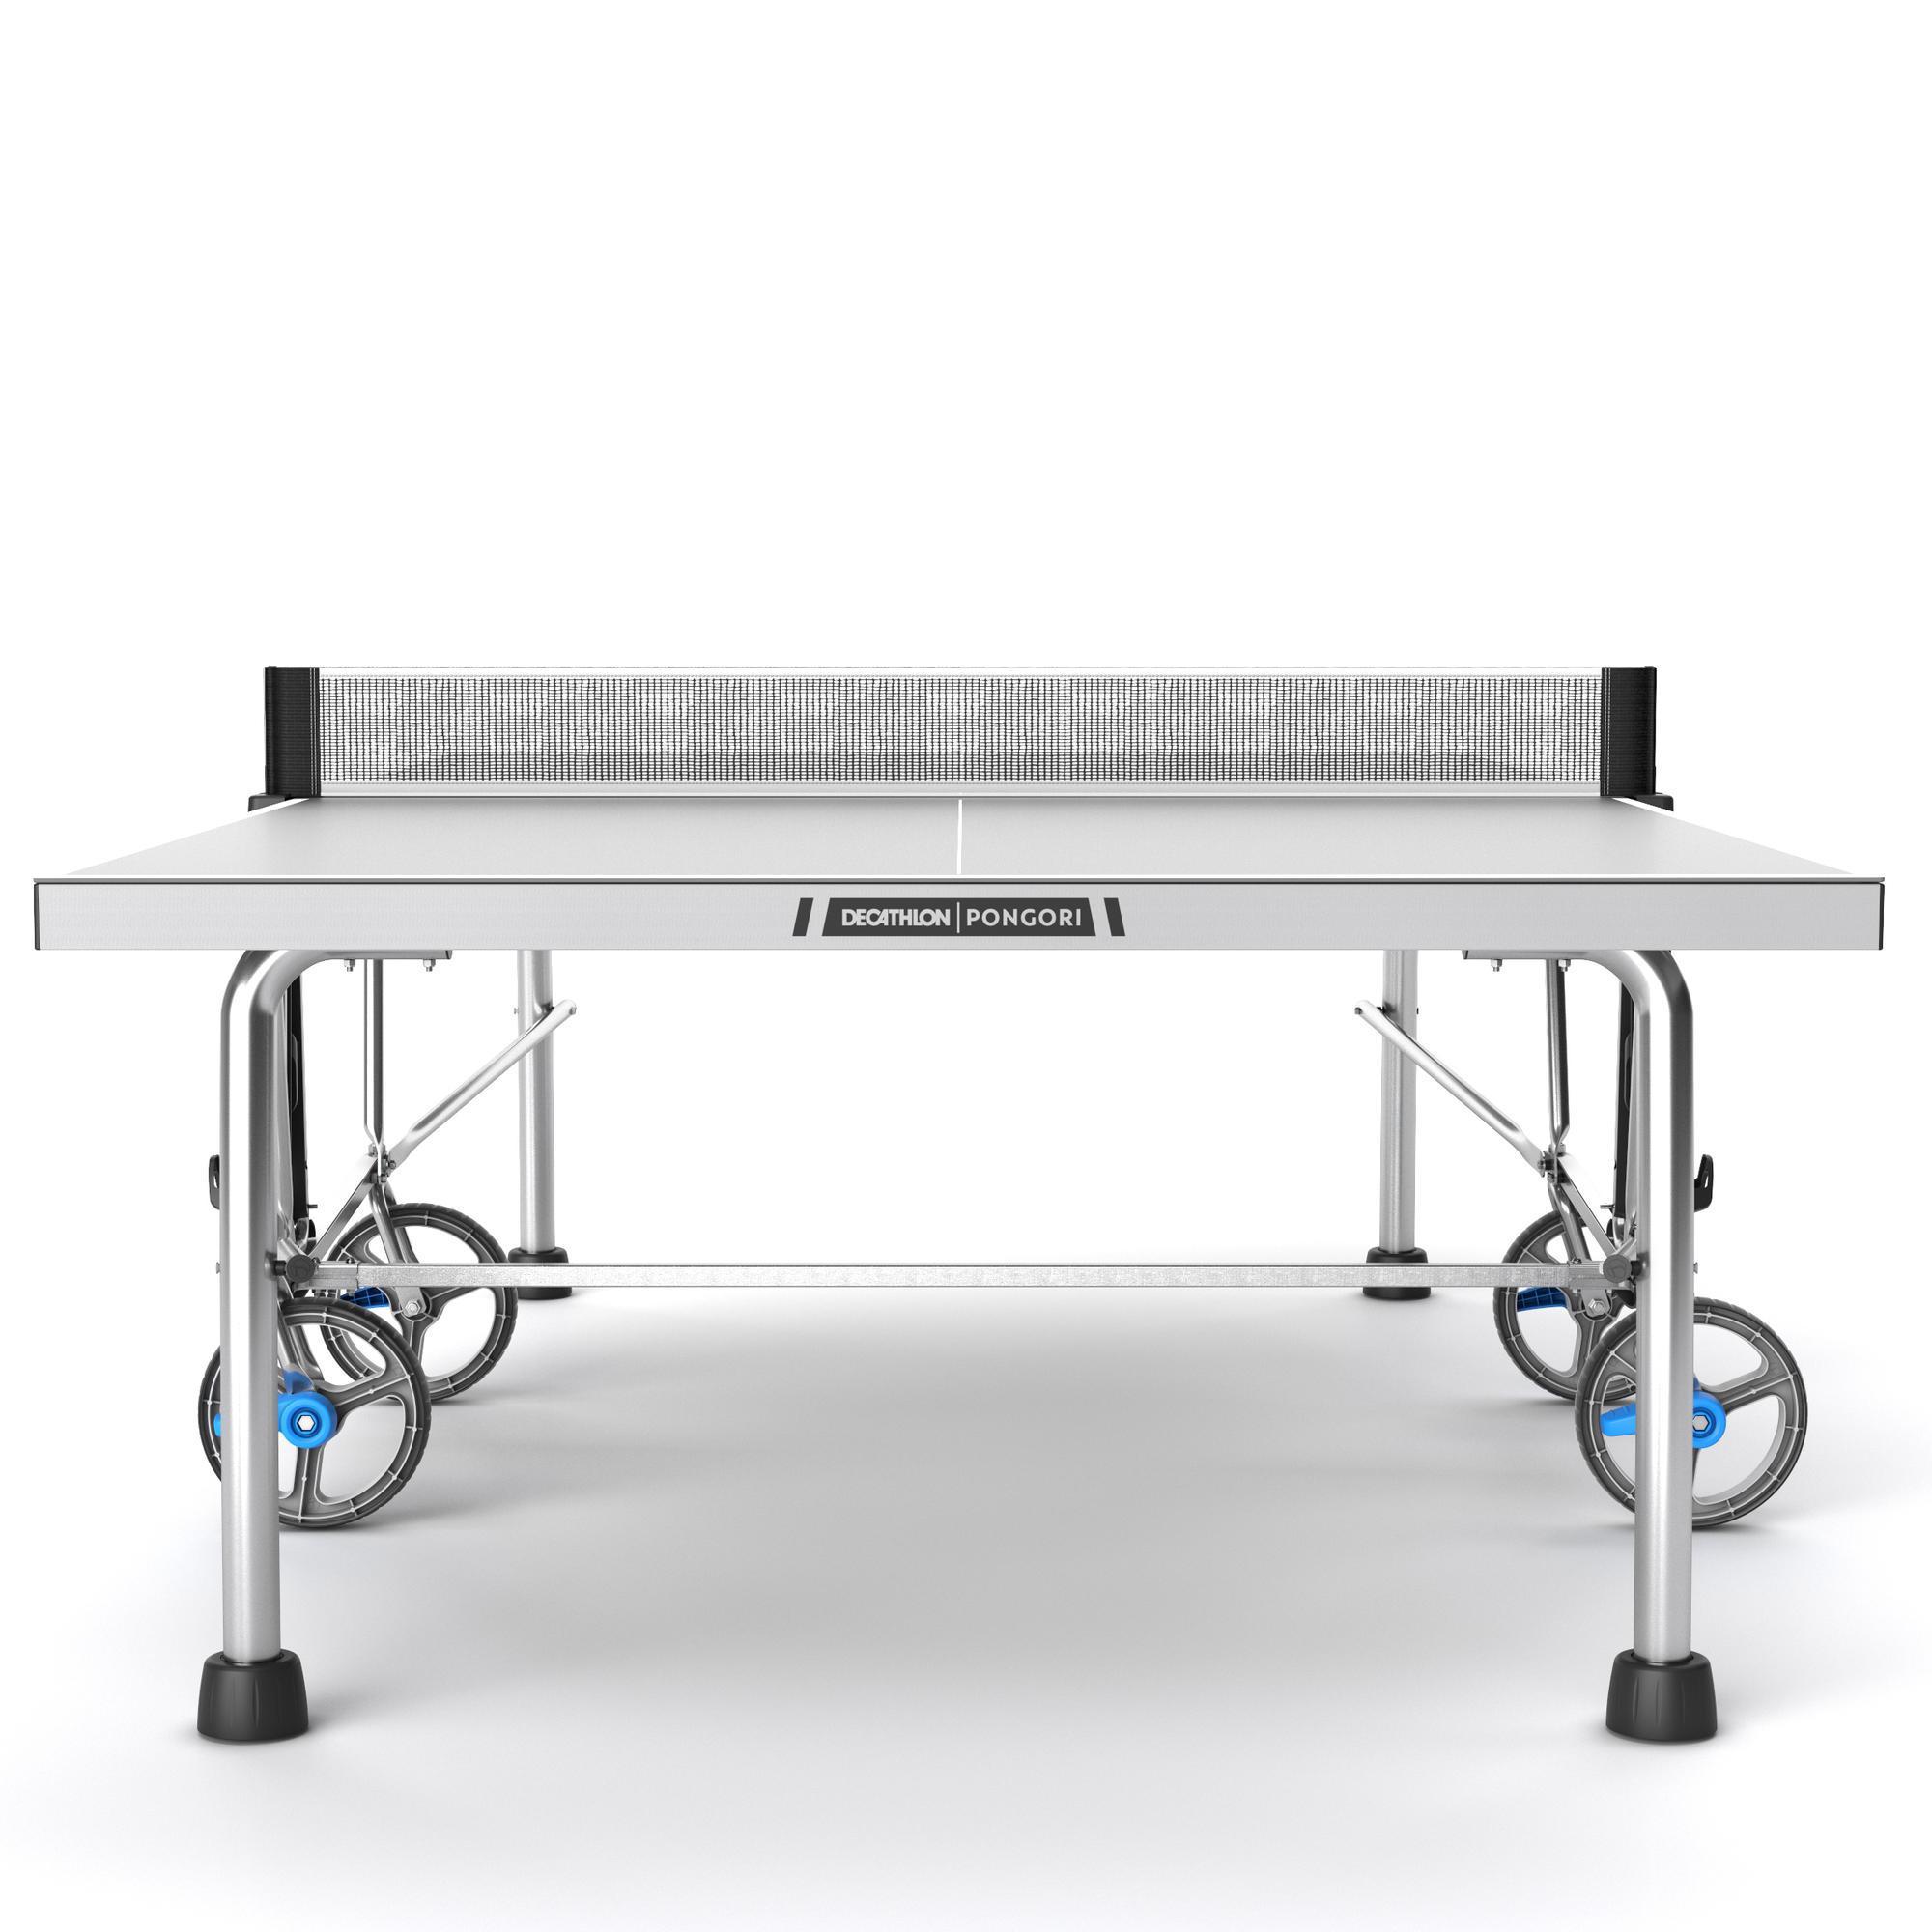 Outdoor Table Tennis Table PPT 900 